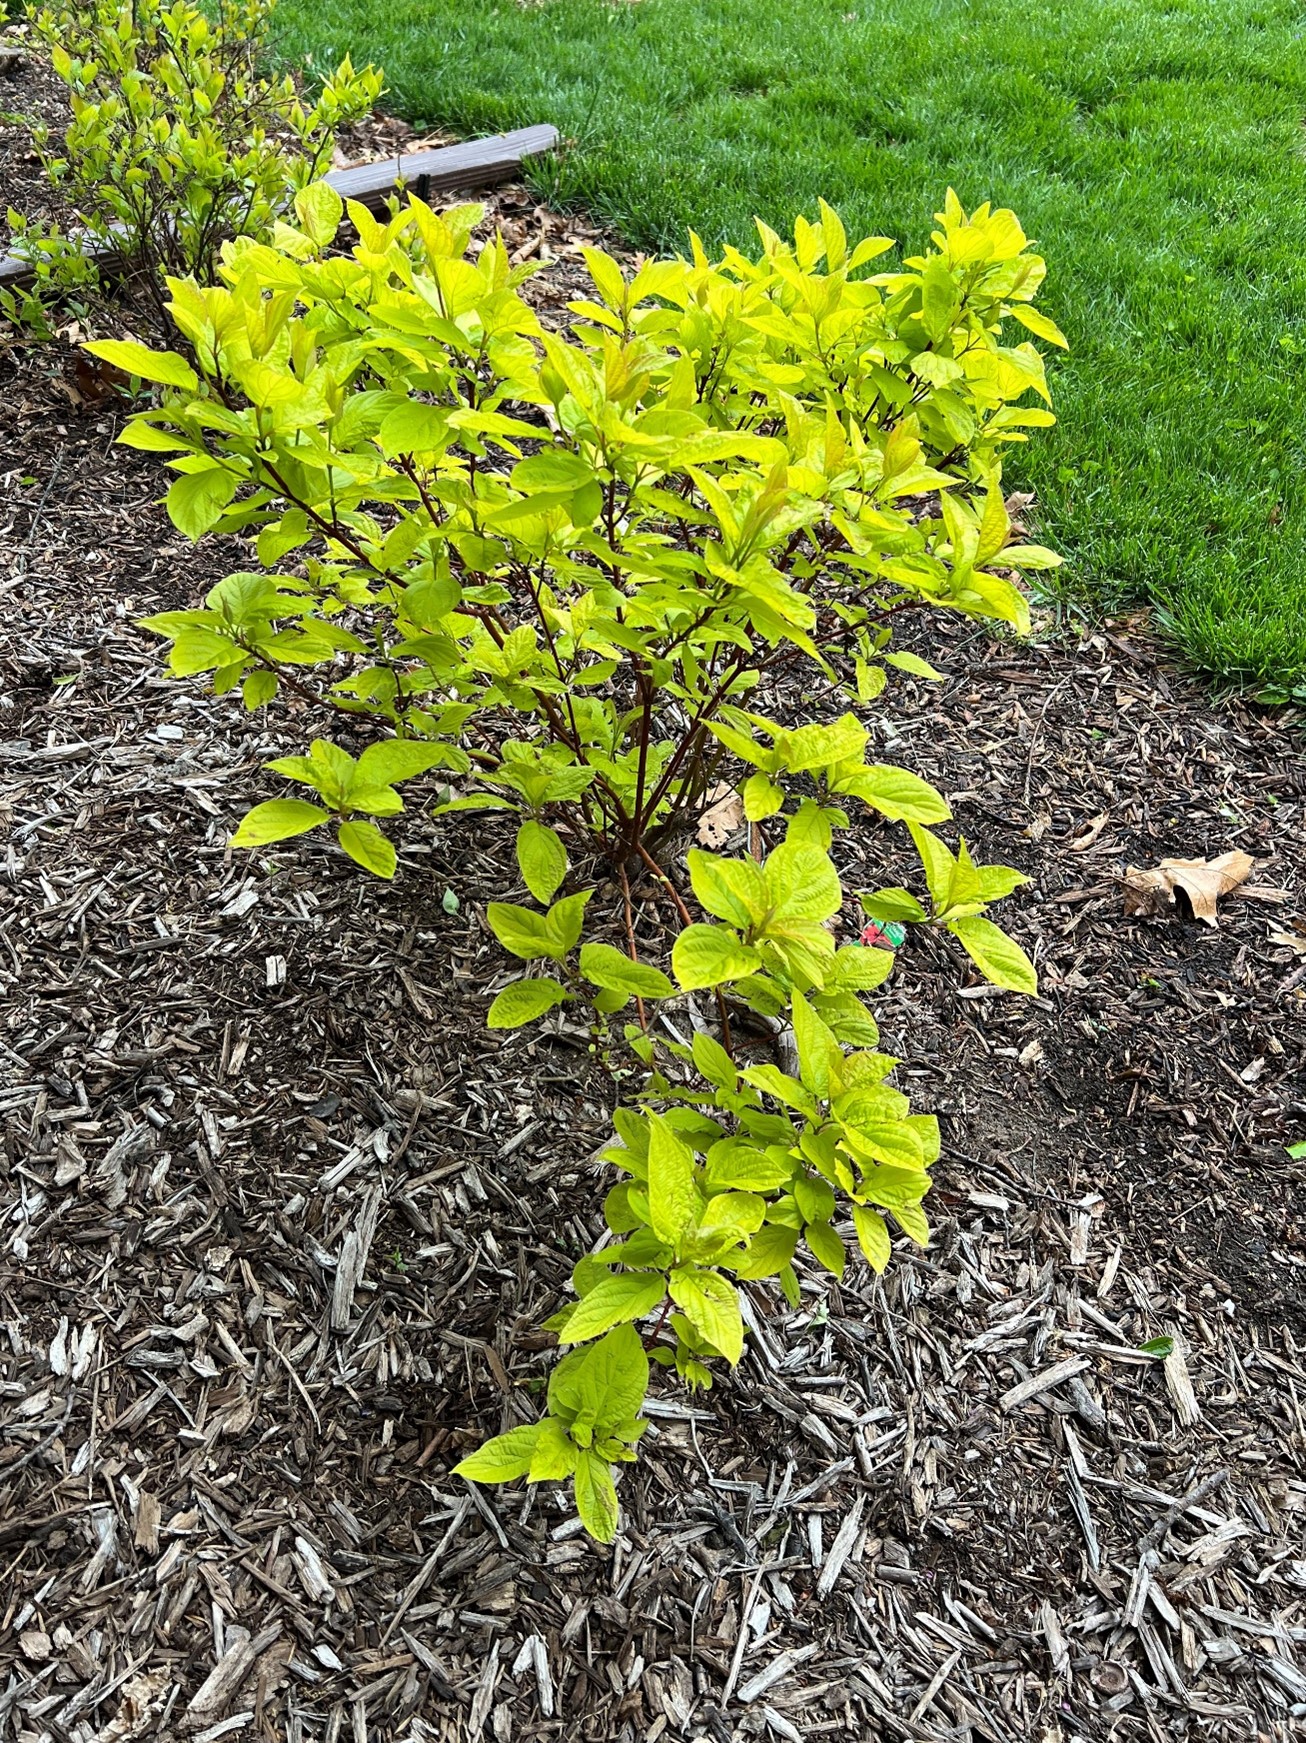 Chartreuse, yellow-green dogwood shrub in a mulched bed